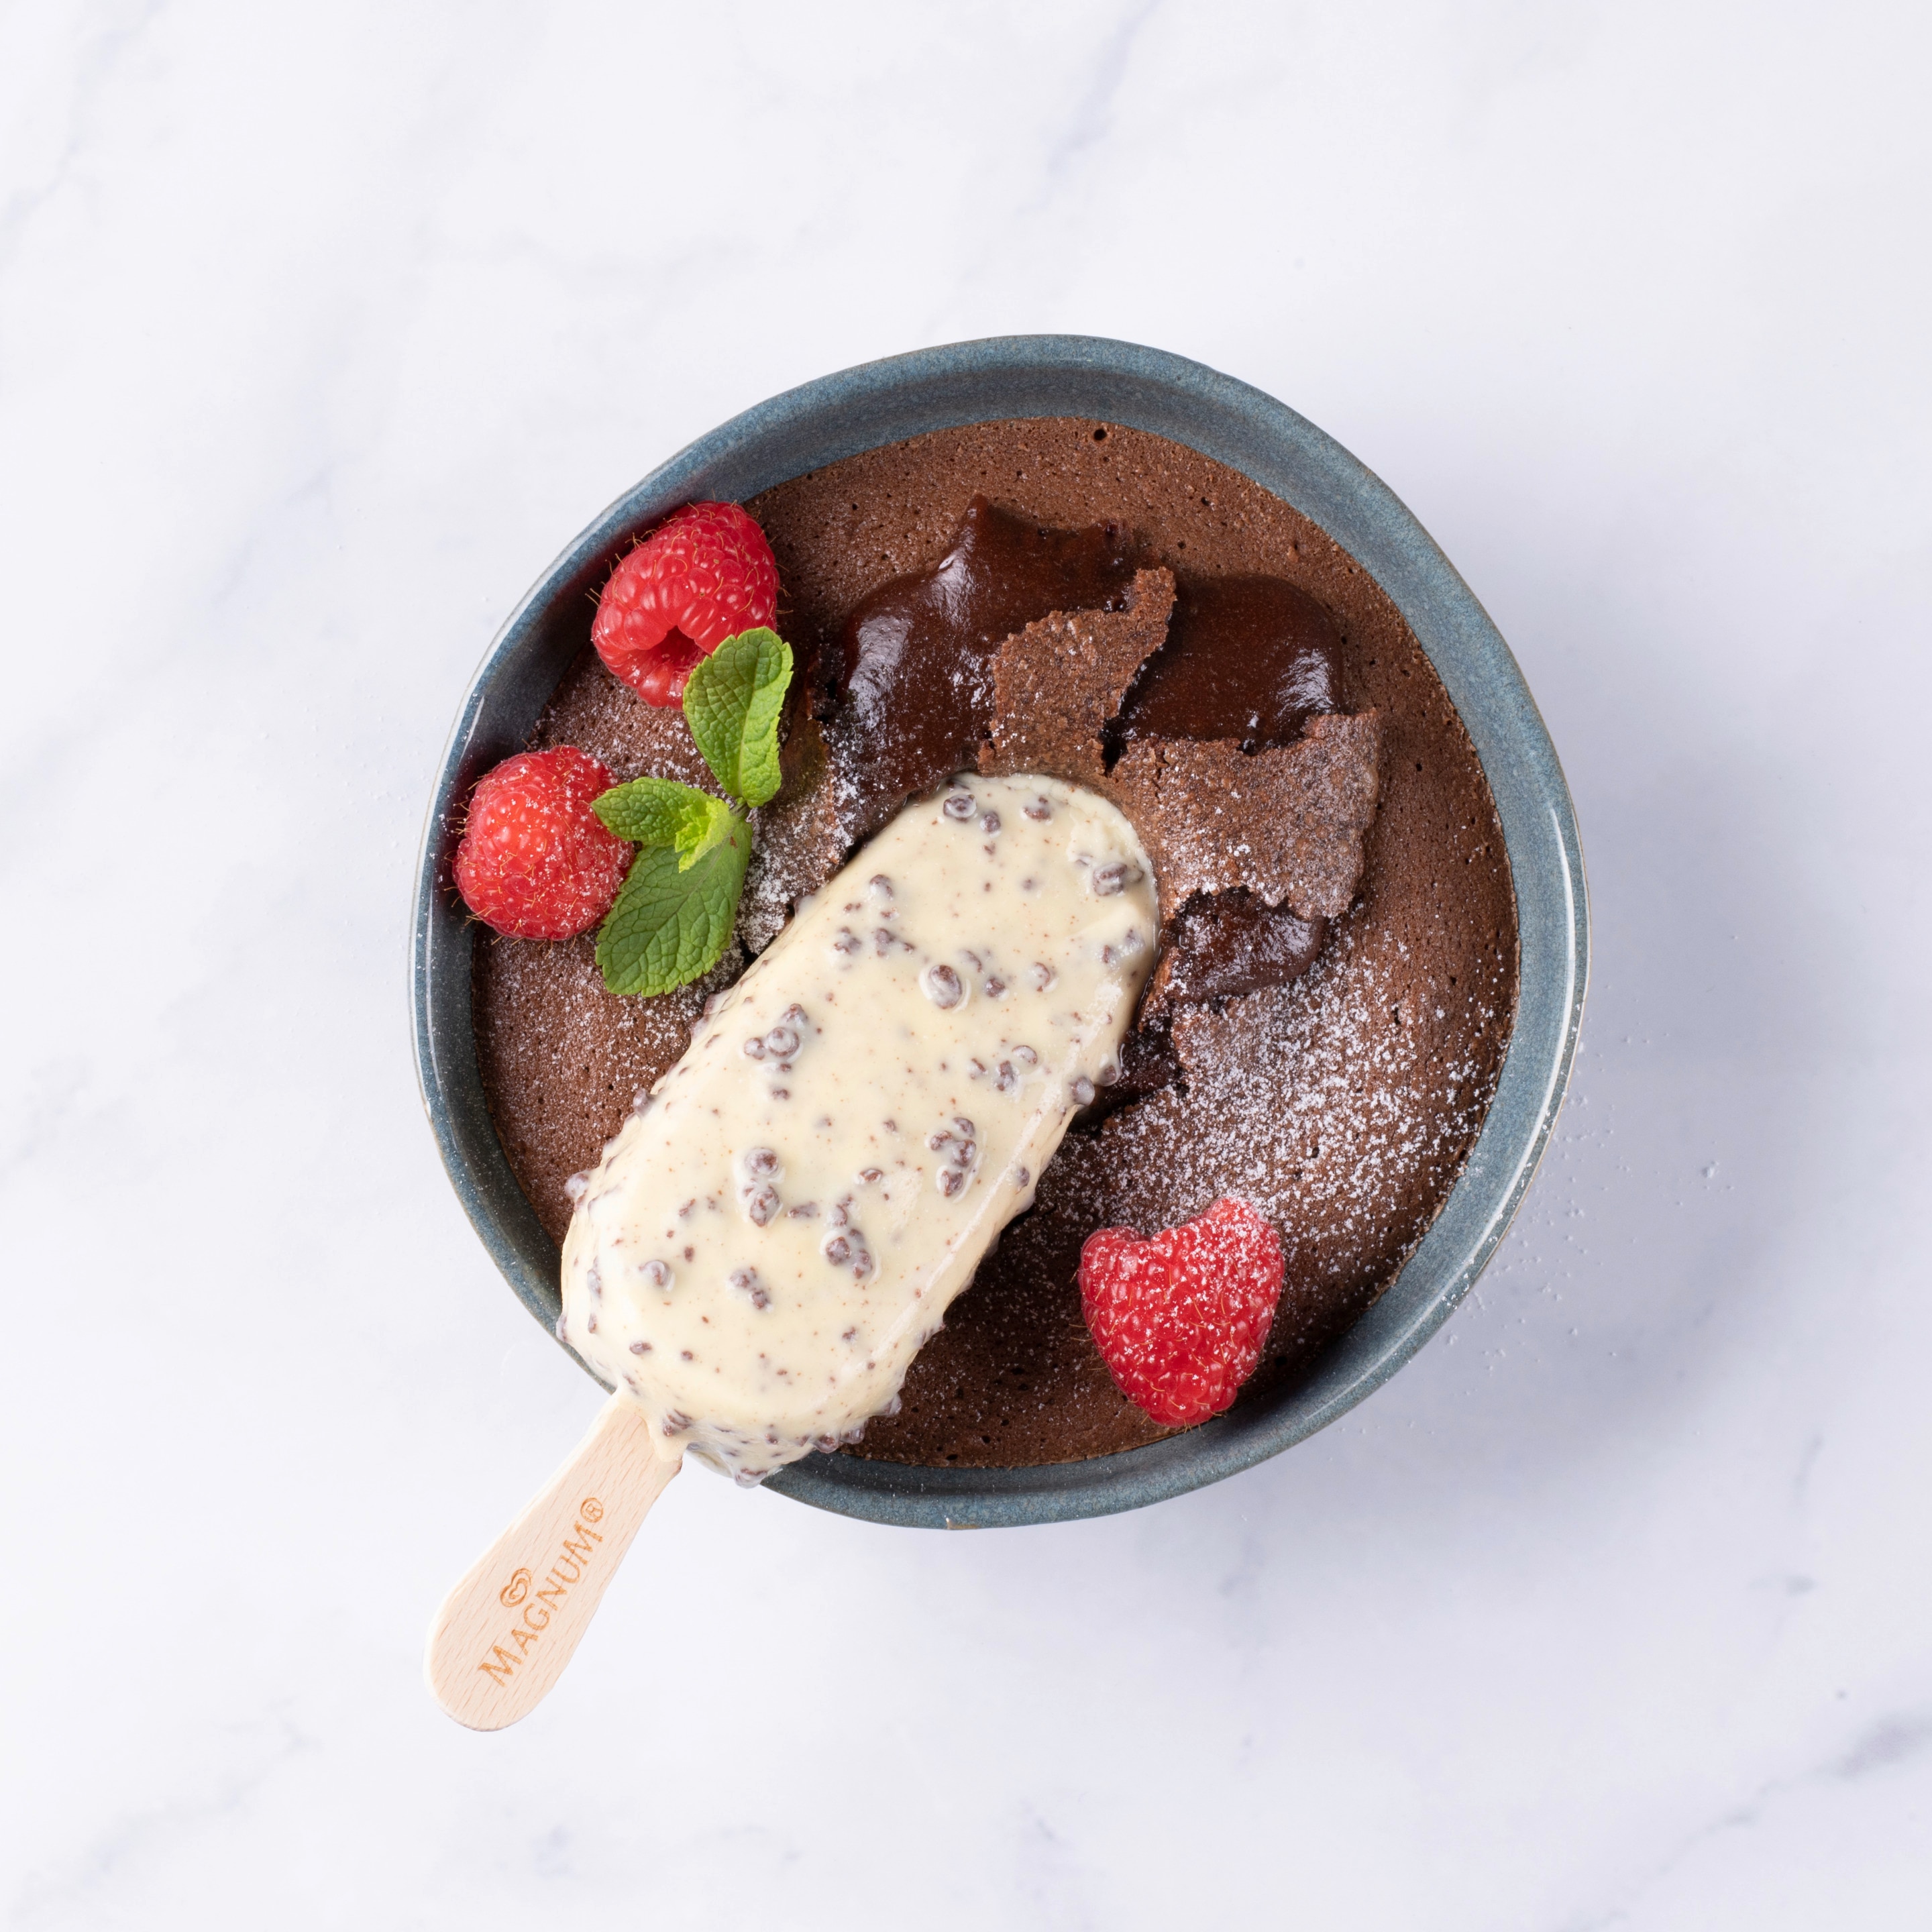 Magnum baked chocolate pudding made with Magnum White Chocolate Cookies 